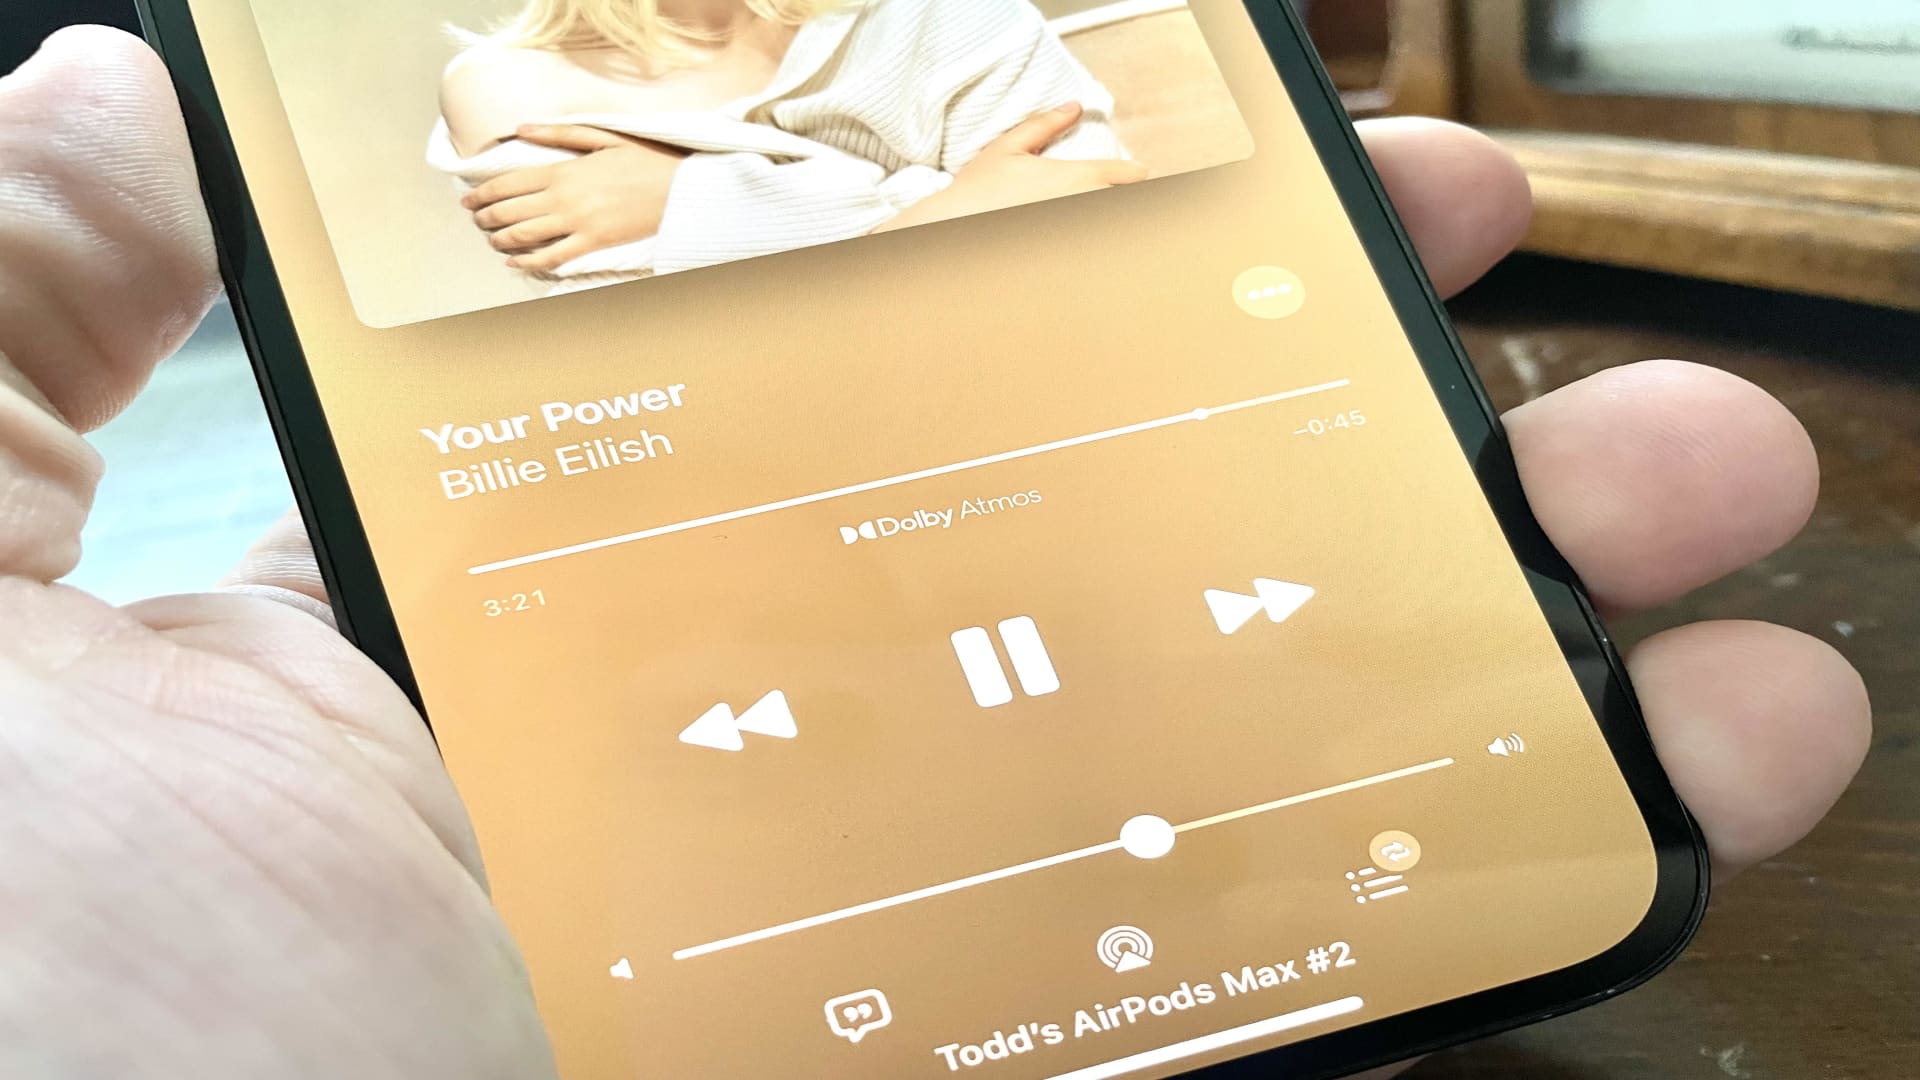 Apple Music with Dolby Atmos spatial audio